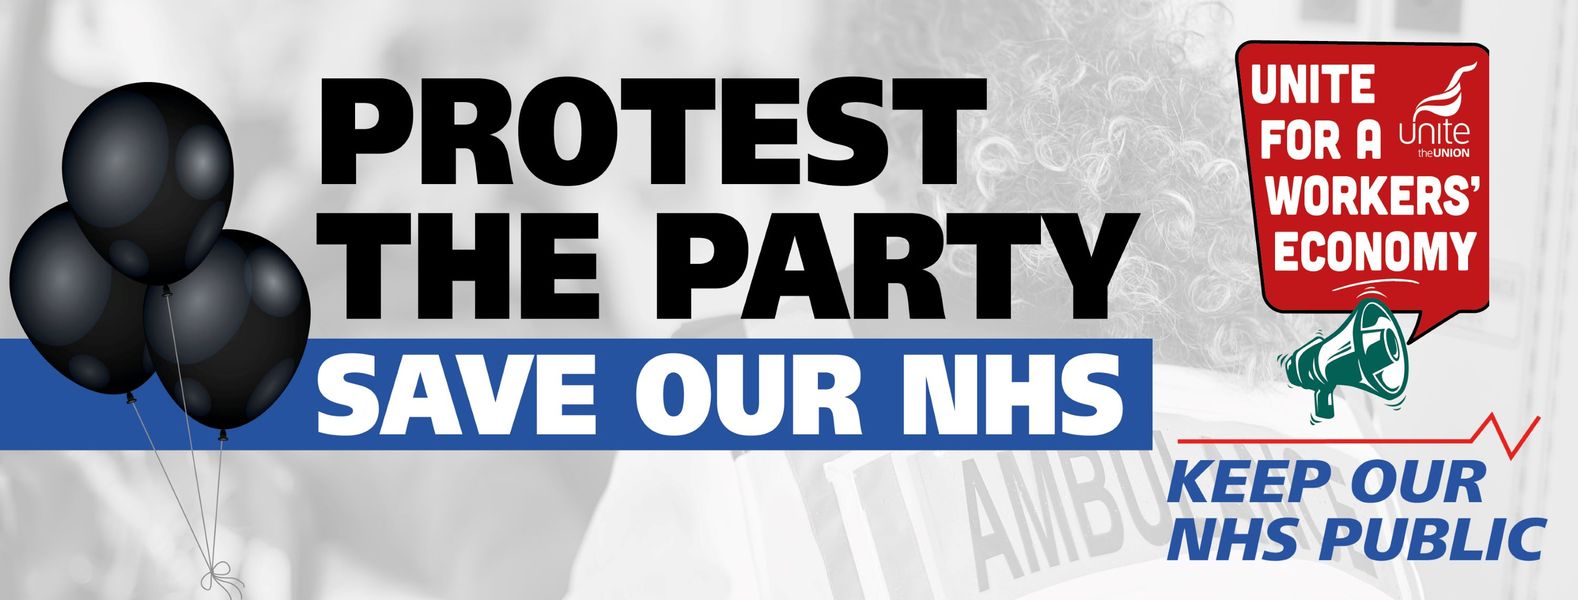 Protest the Party | Save our NHS